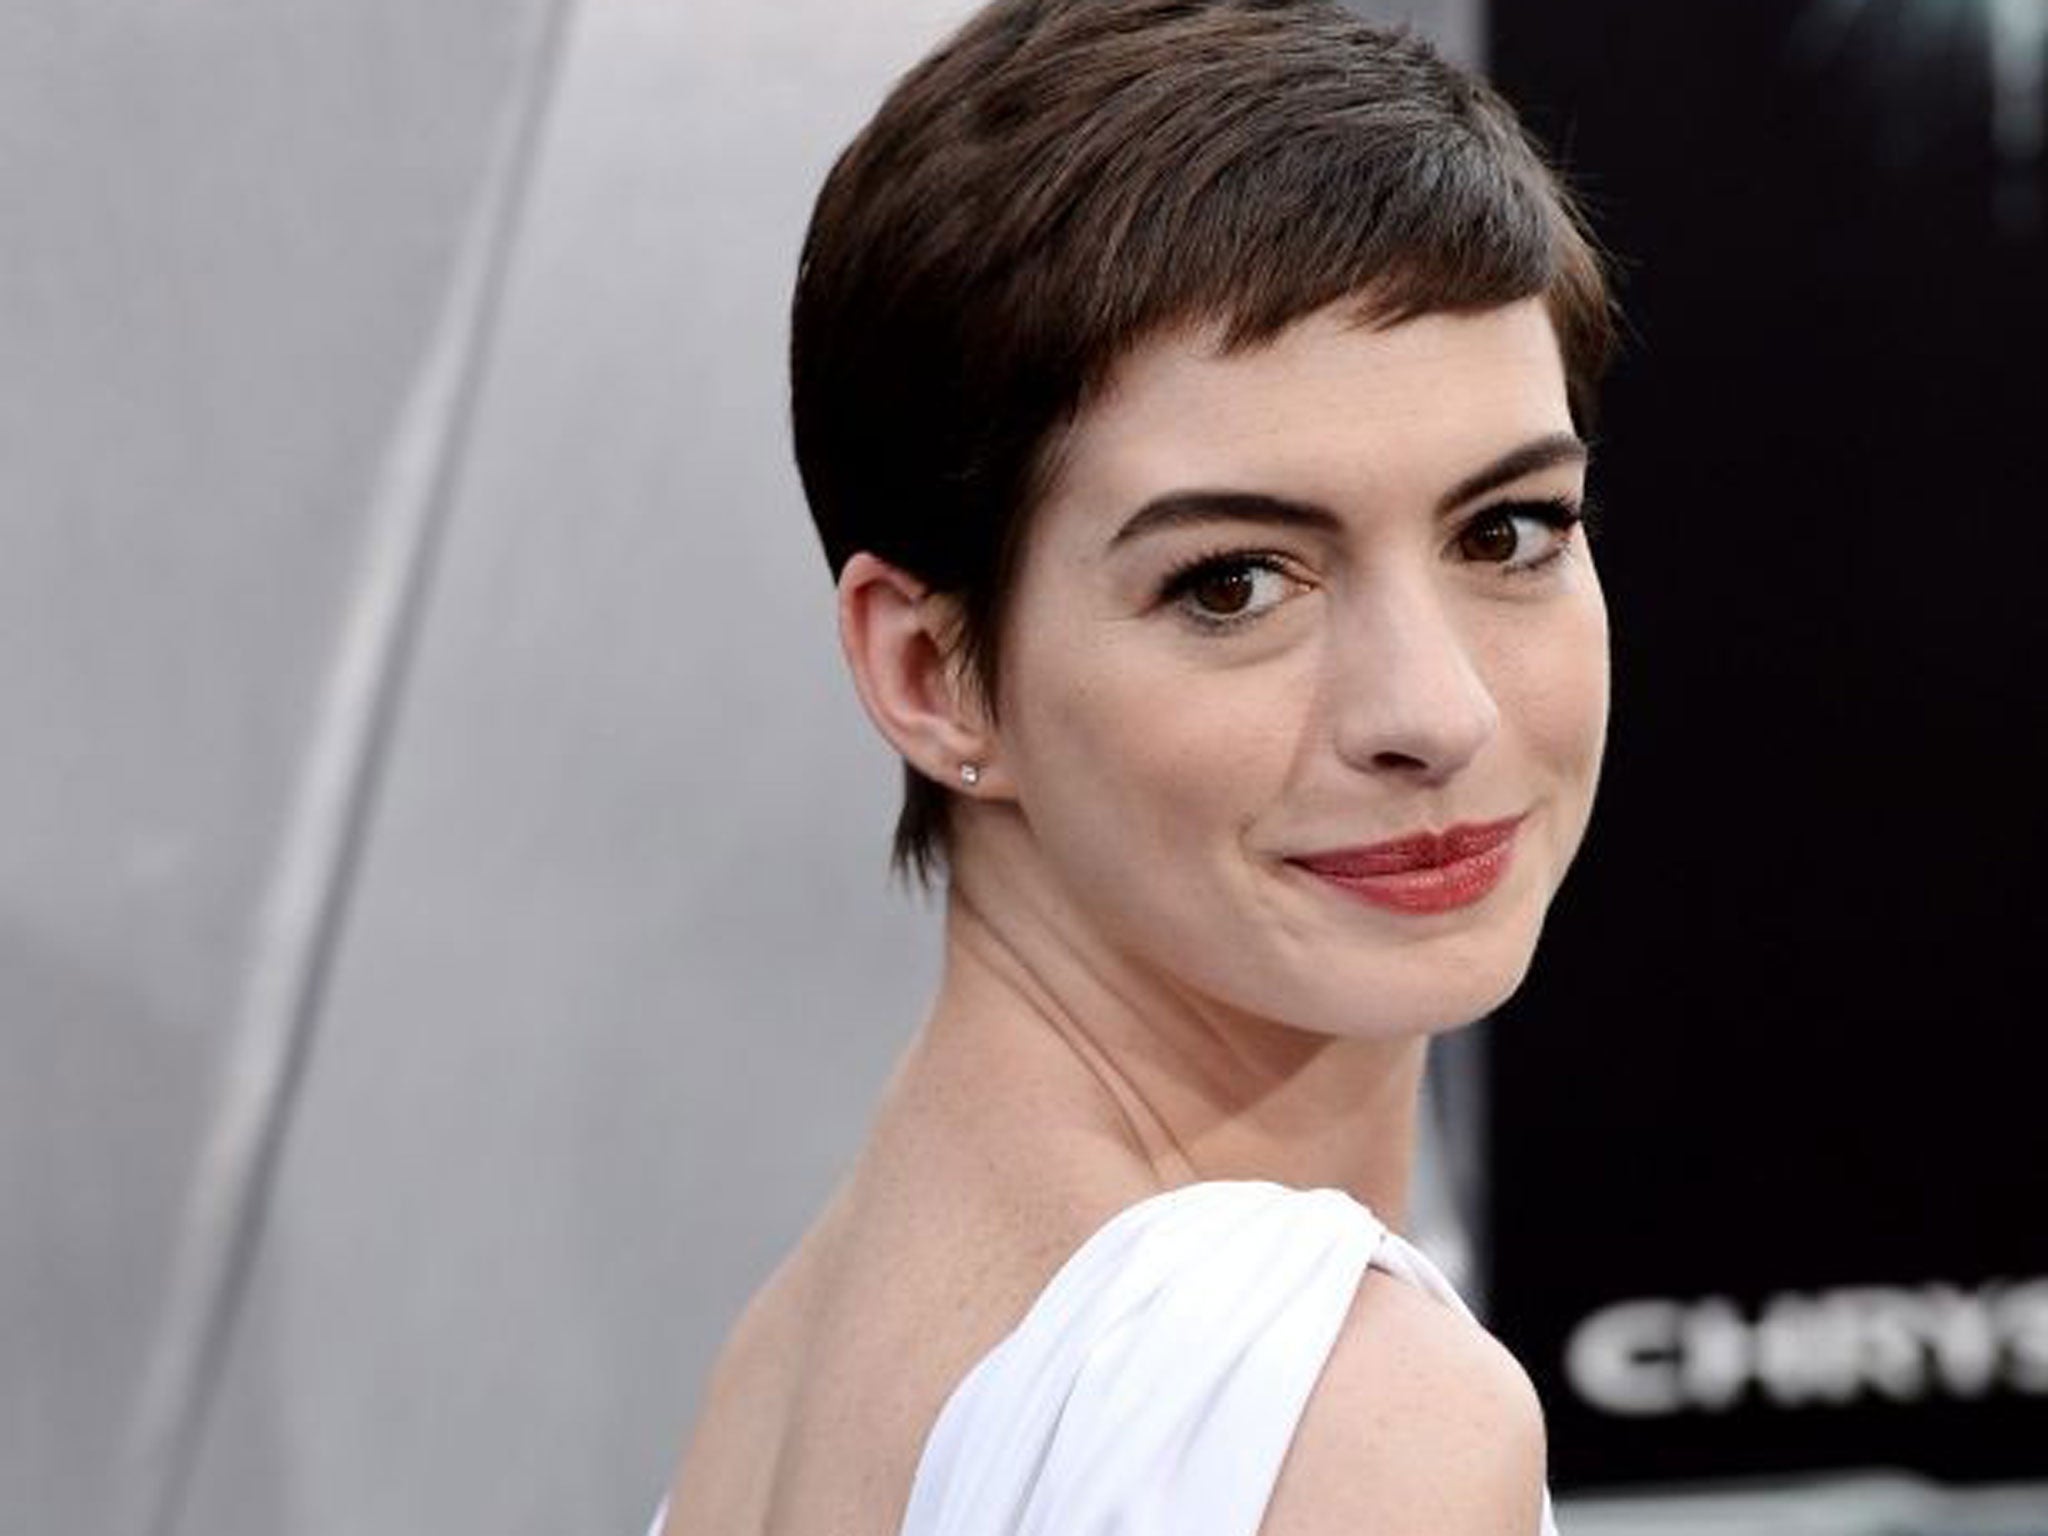 Anne Hathaway was cast as the quirky troubled Tiffany before American Hustle star Lawrence